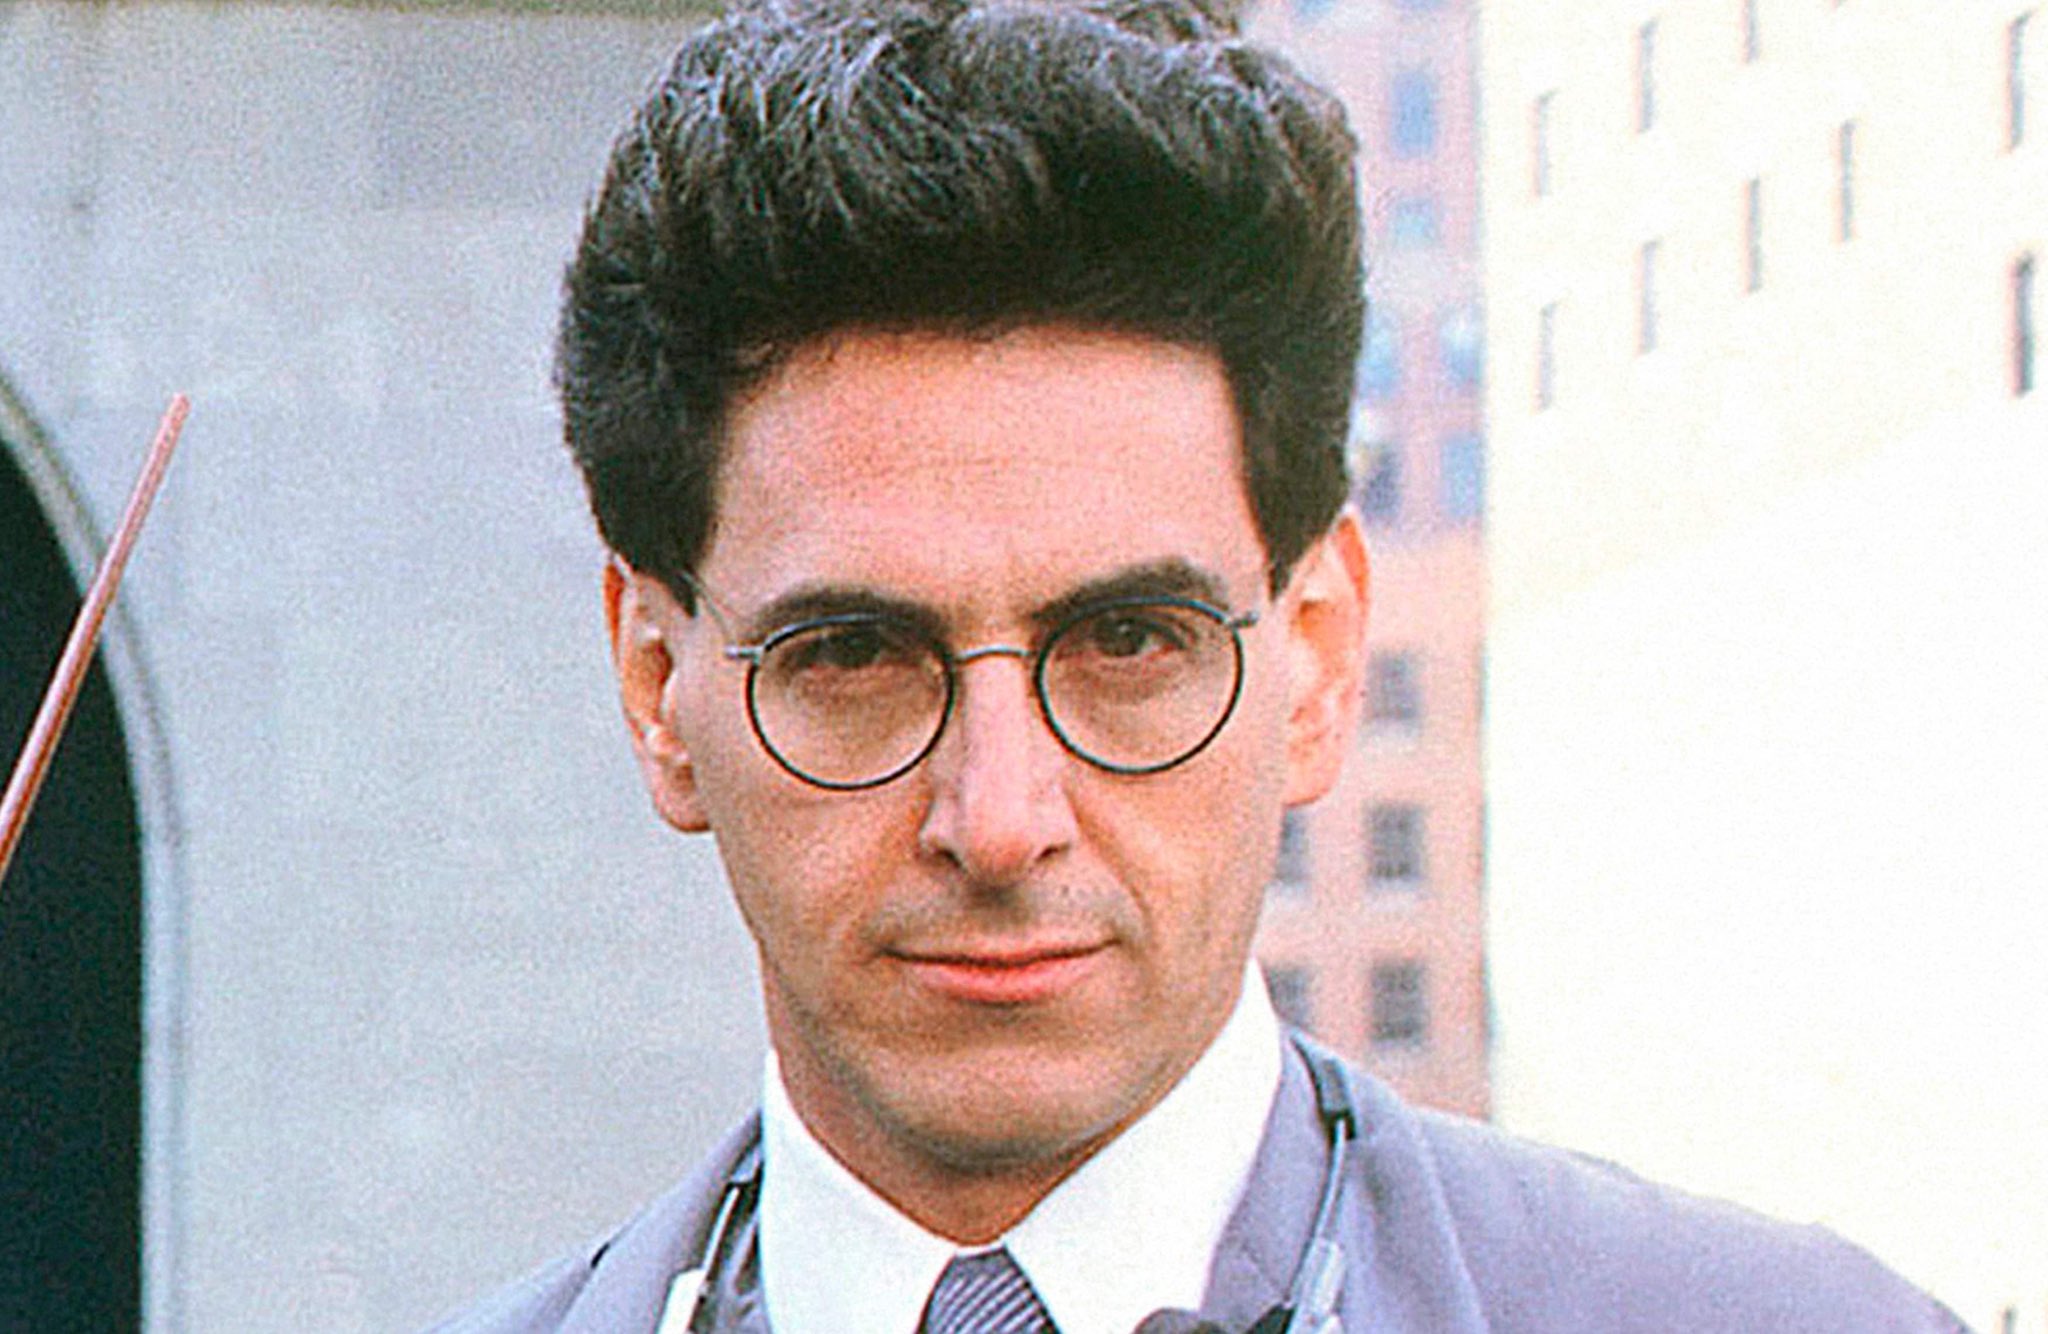 Happy birthday to Harold Ramis! The iconic actor, comedian, and director would have turned 77 years old today. 